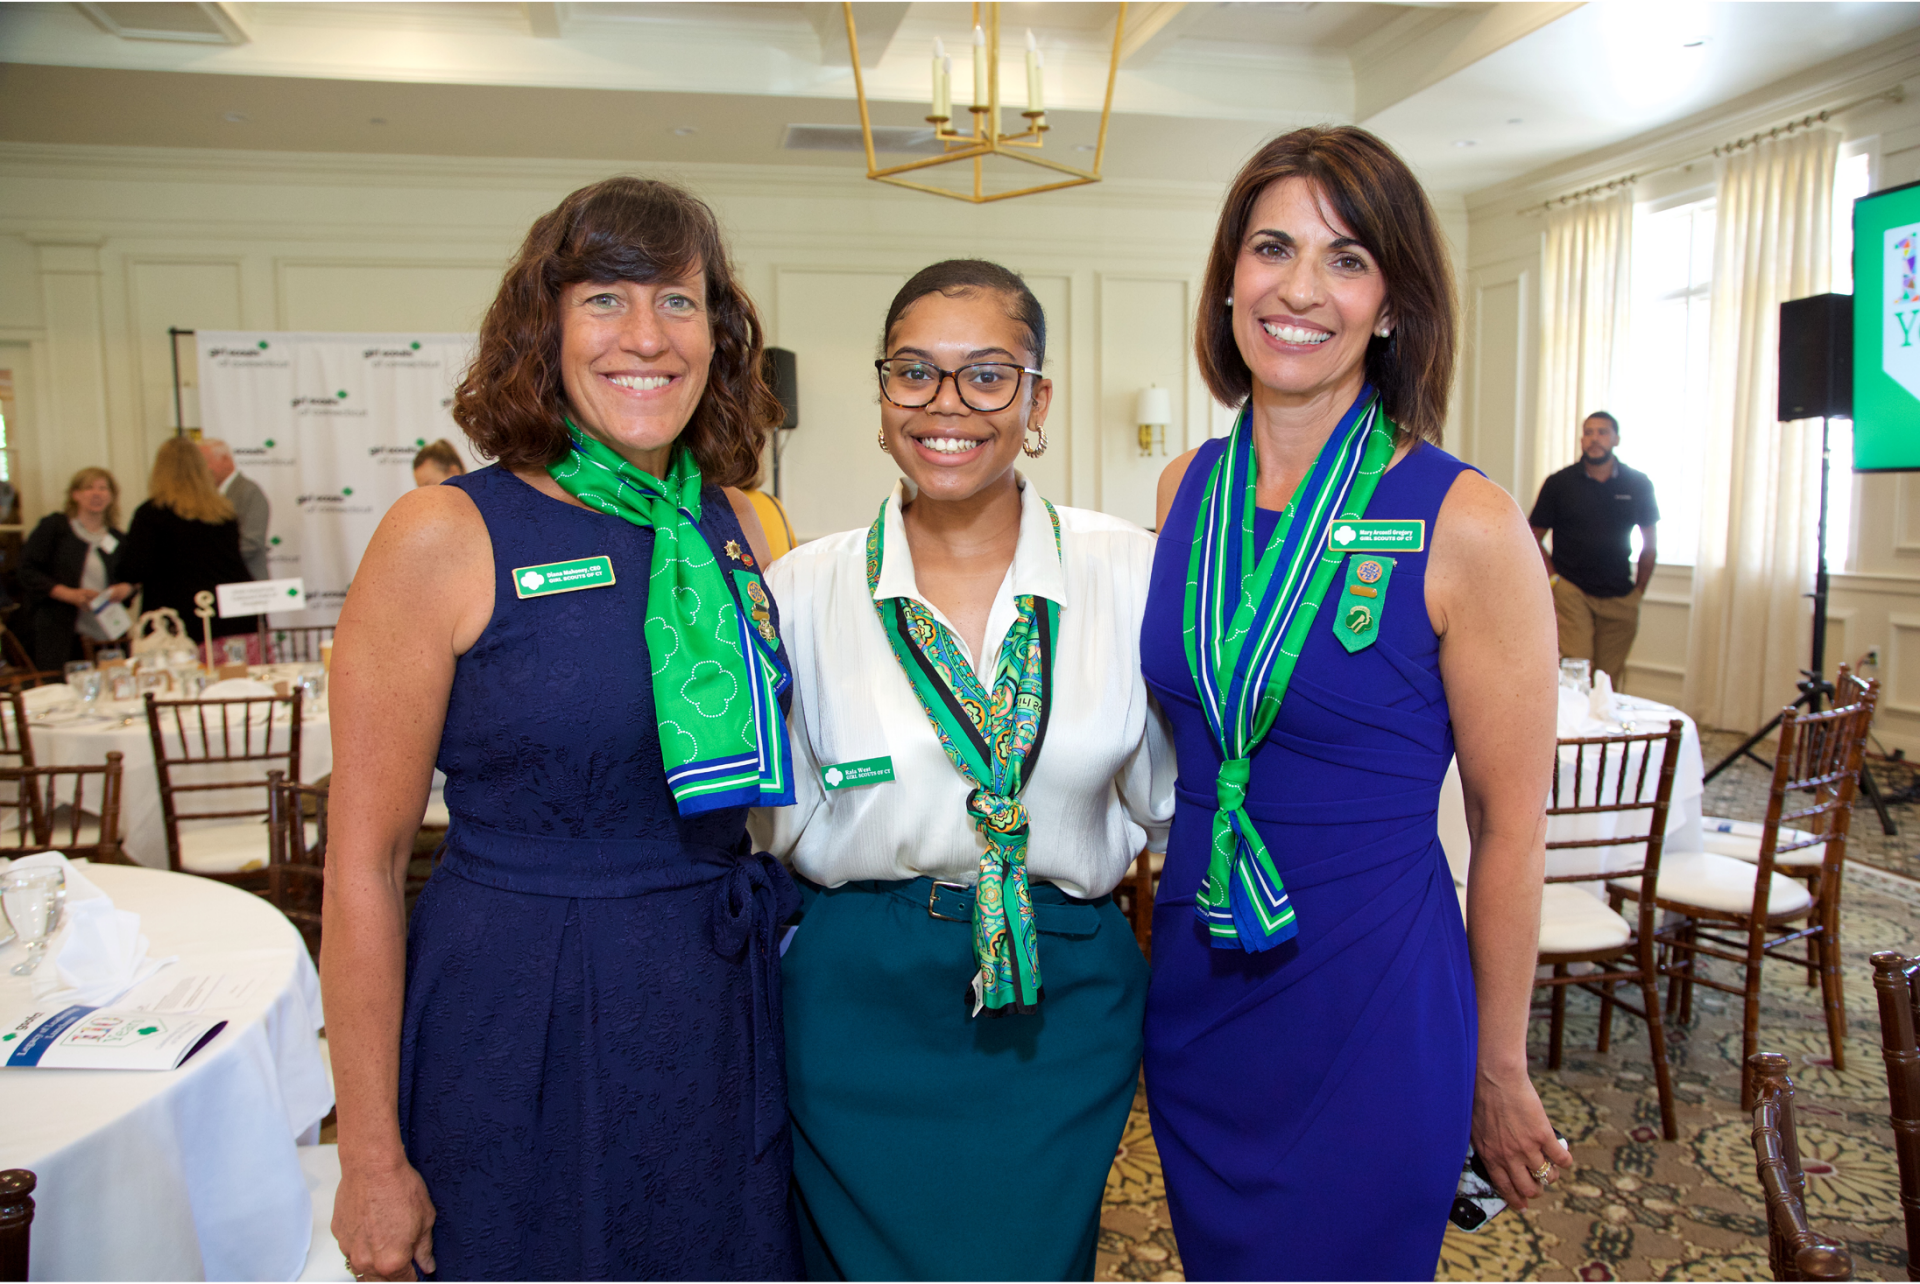 Three executies from Girl Scouts of Connecticut, standing together and smiling